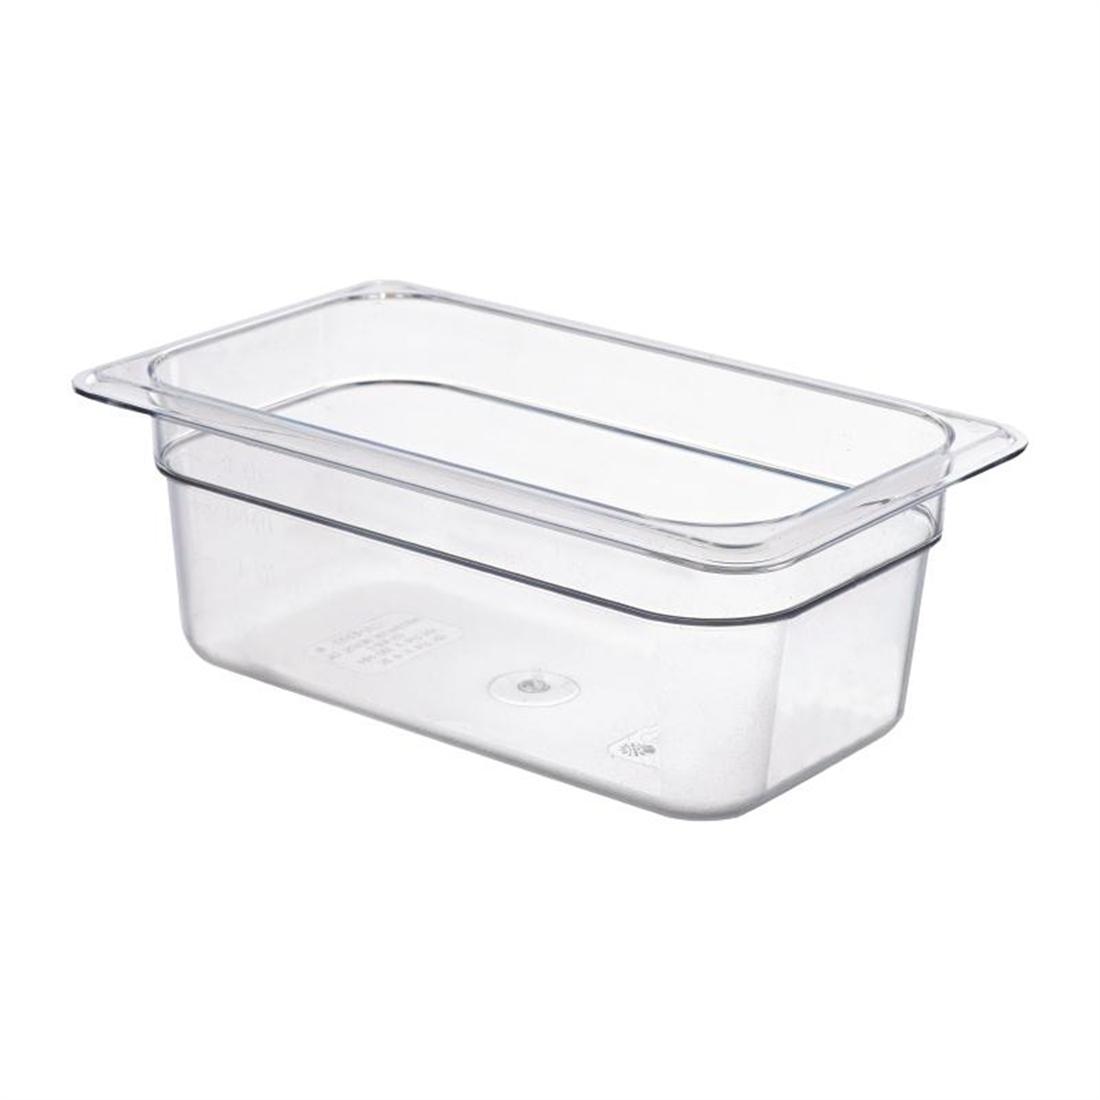 Cambro Polycarbonate 1/4 Gastronorm Pan Lid Clear 